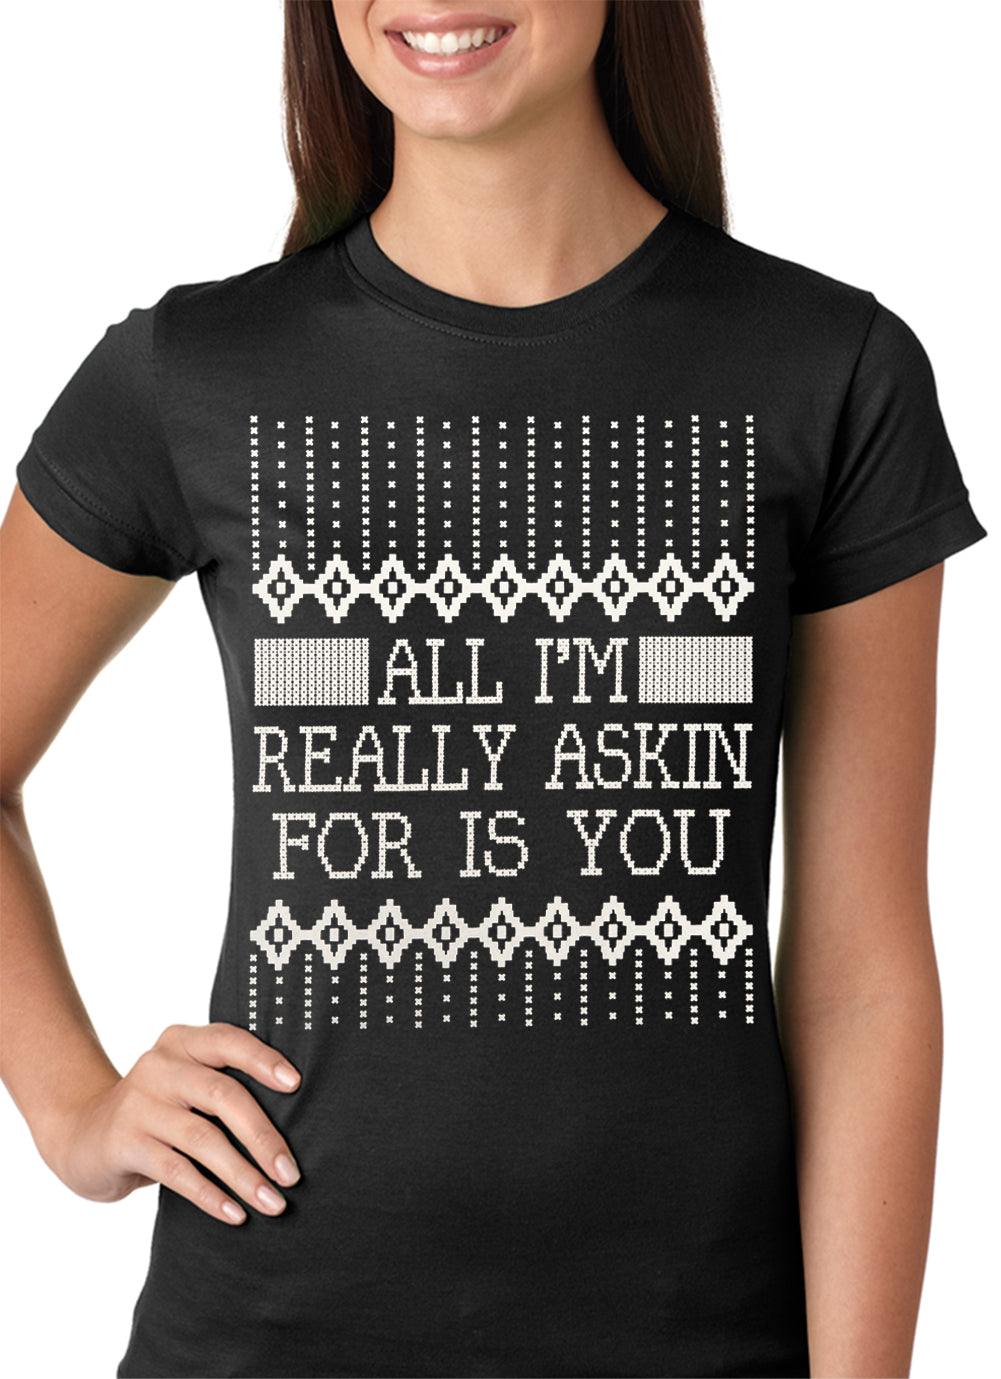 All I'm Asking For is You Girls T-shirt Black